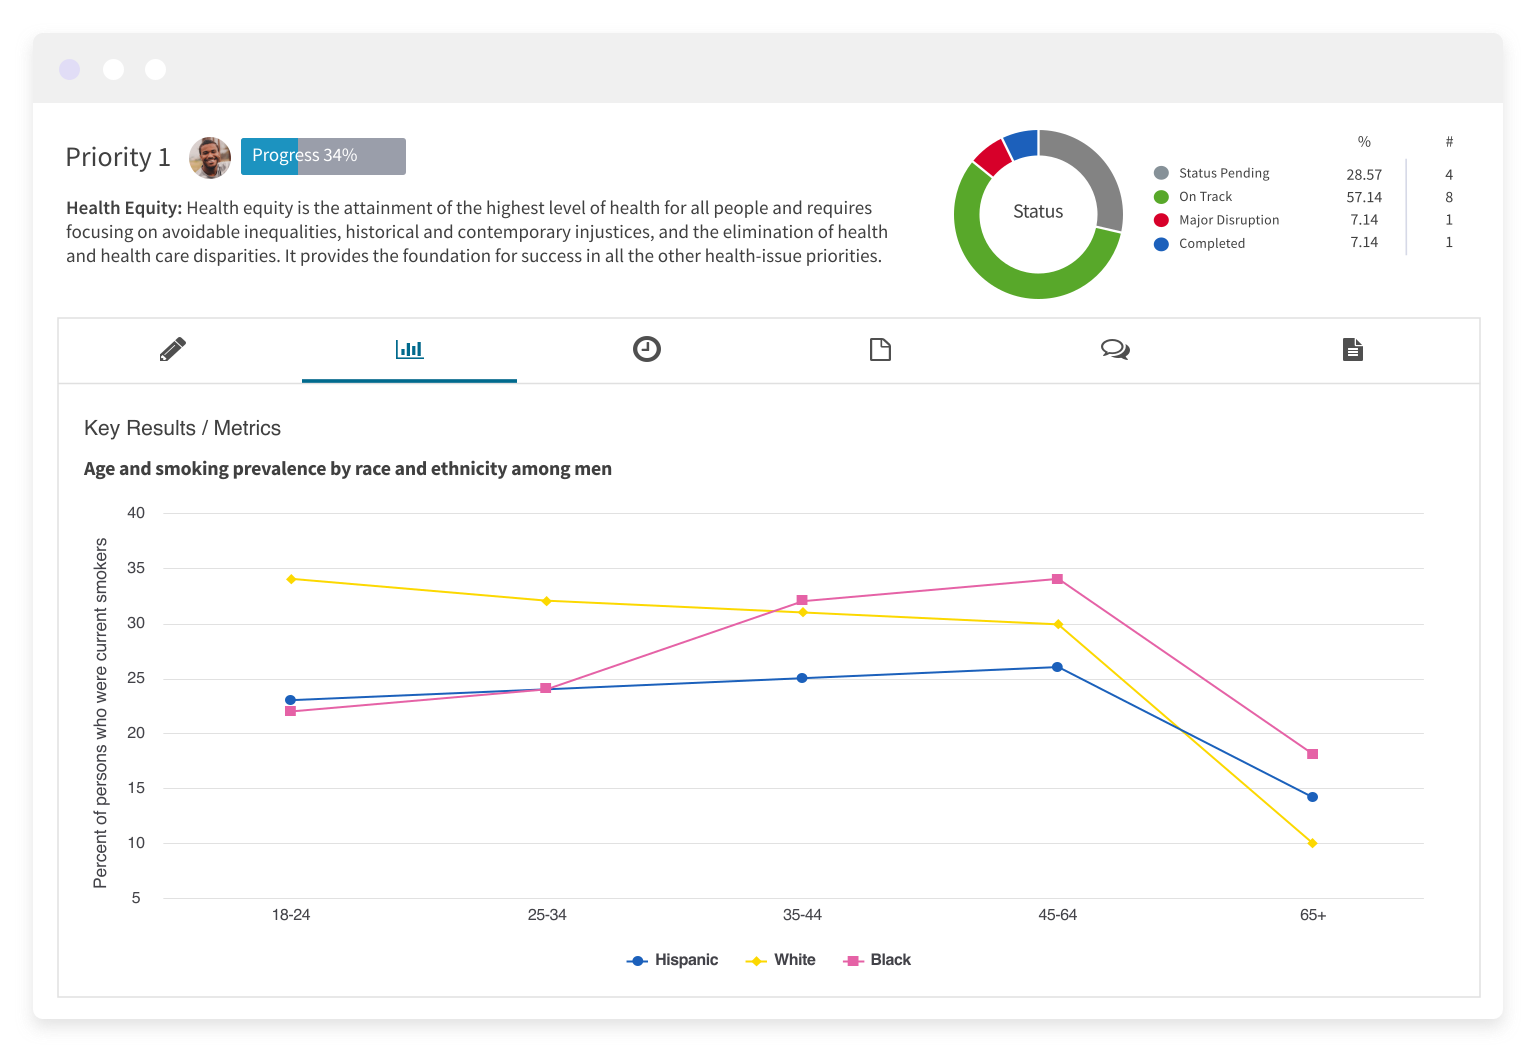 Align performance measure visuals with strategic goals and actions in your plans. Embed those same charts and graphs into your management reports to provide a complete view of organizational performance.